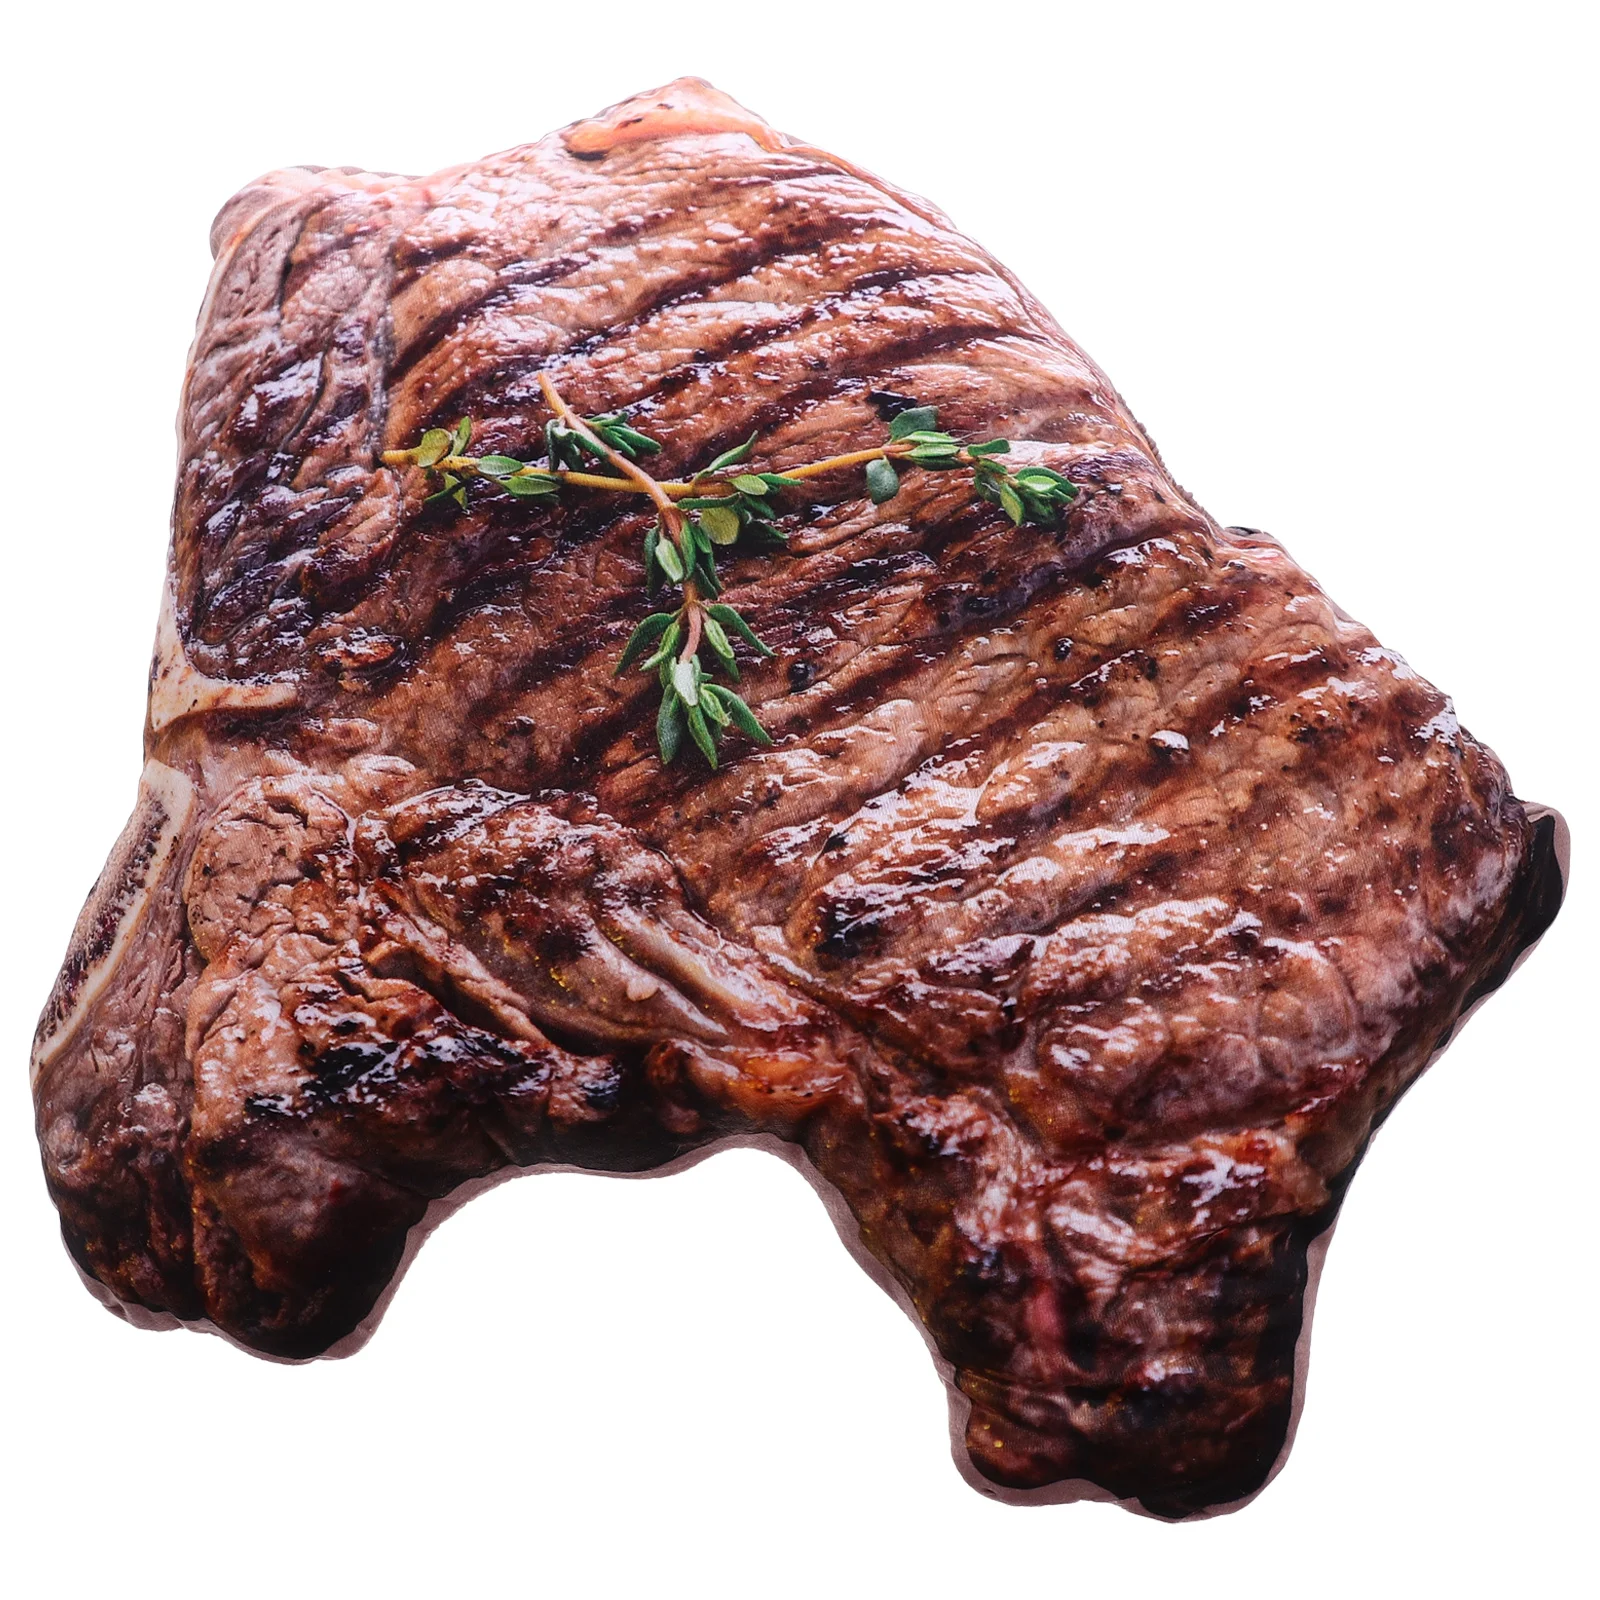 

Steak Pillow Plush Toy Lovely Food Hugging Back Shape Stuffed Pp Cotton Bed Pillows